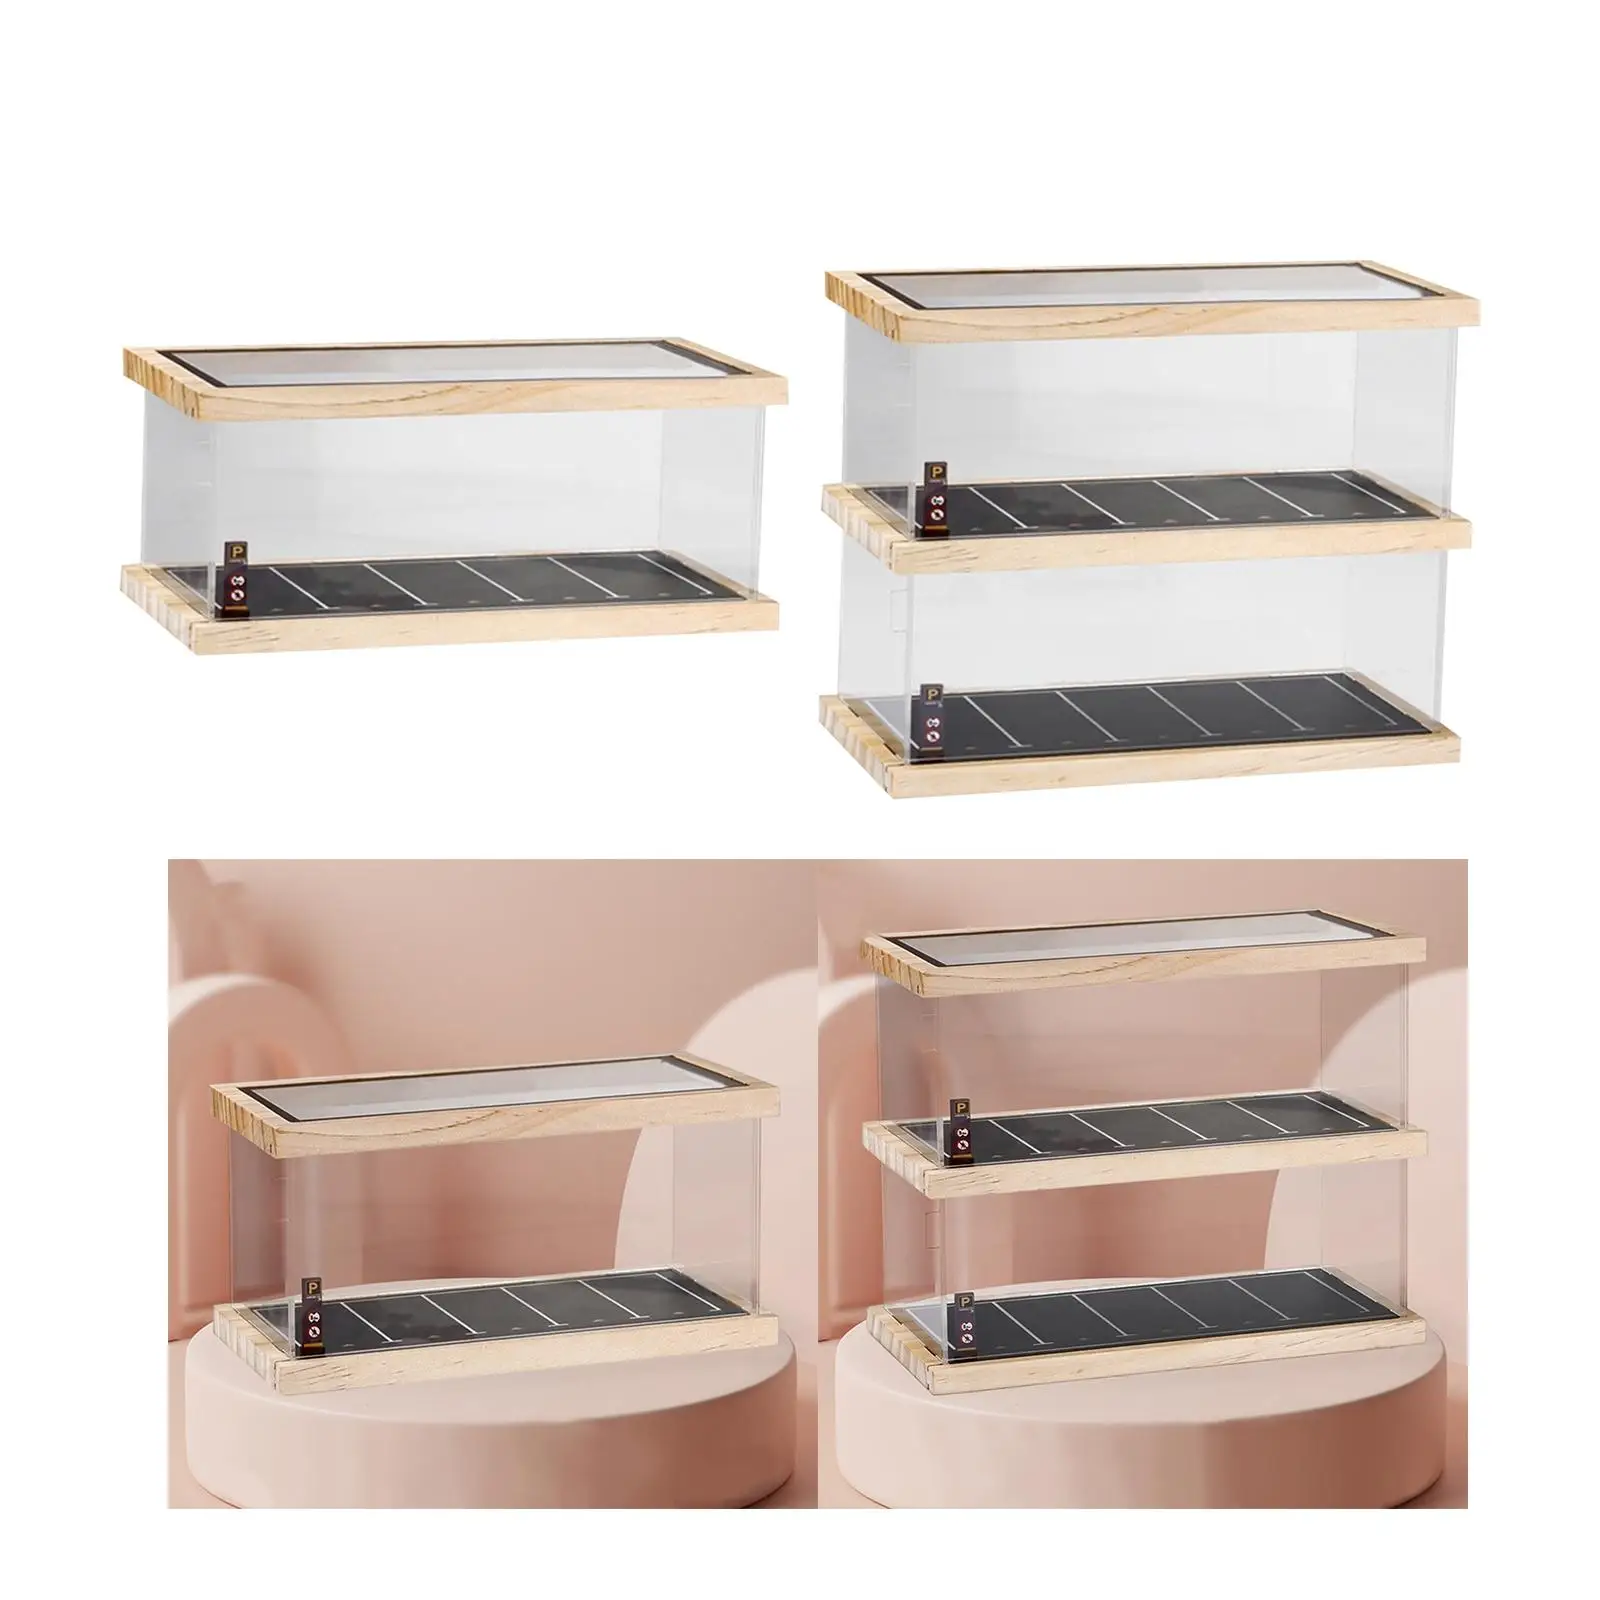 1:64 Parking Lot Acrylic Storage Organizer Decoration Display Case for Office Desk Collectibles Bookshelf Countertop Study